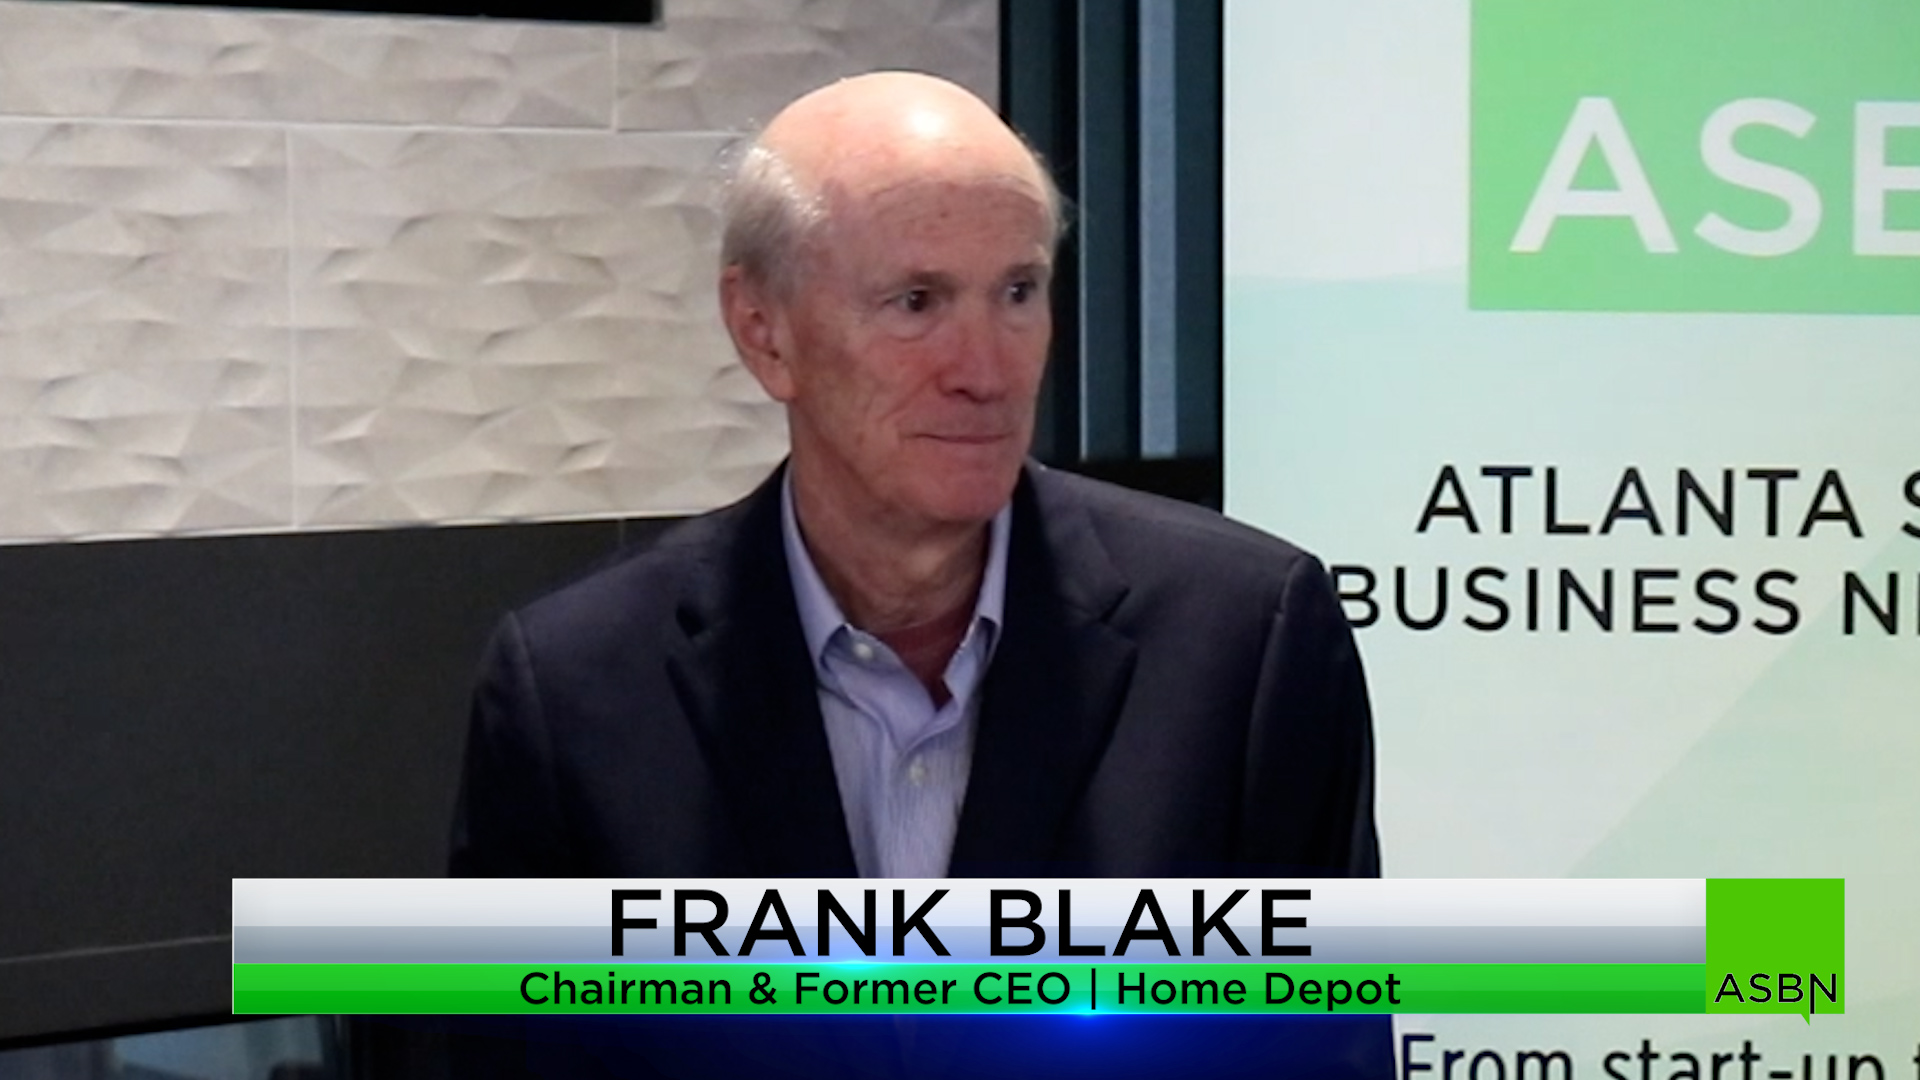 Home Depot Chairman Frank Blake on integrating online and in-store retail experiences